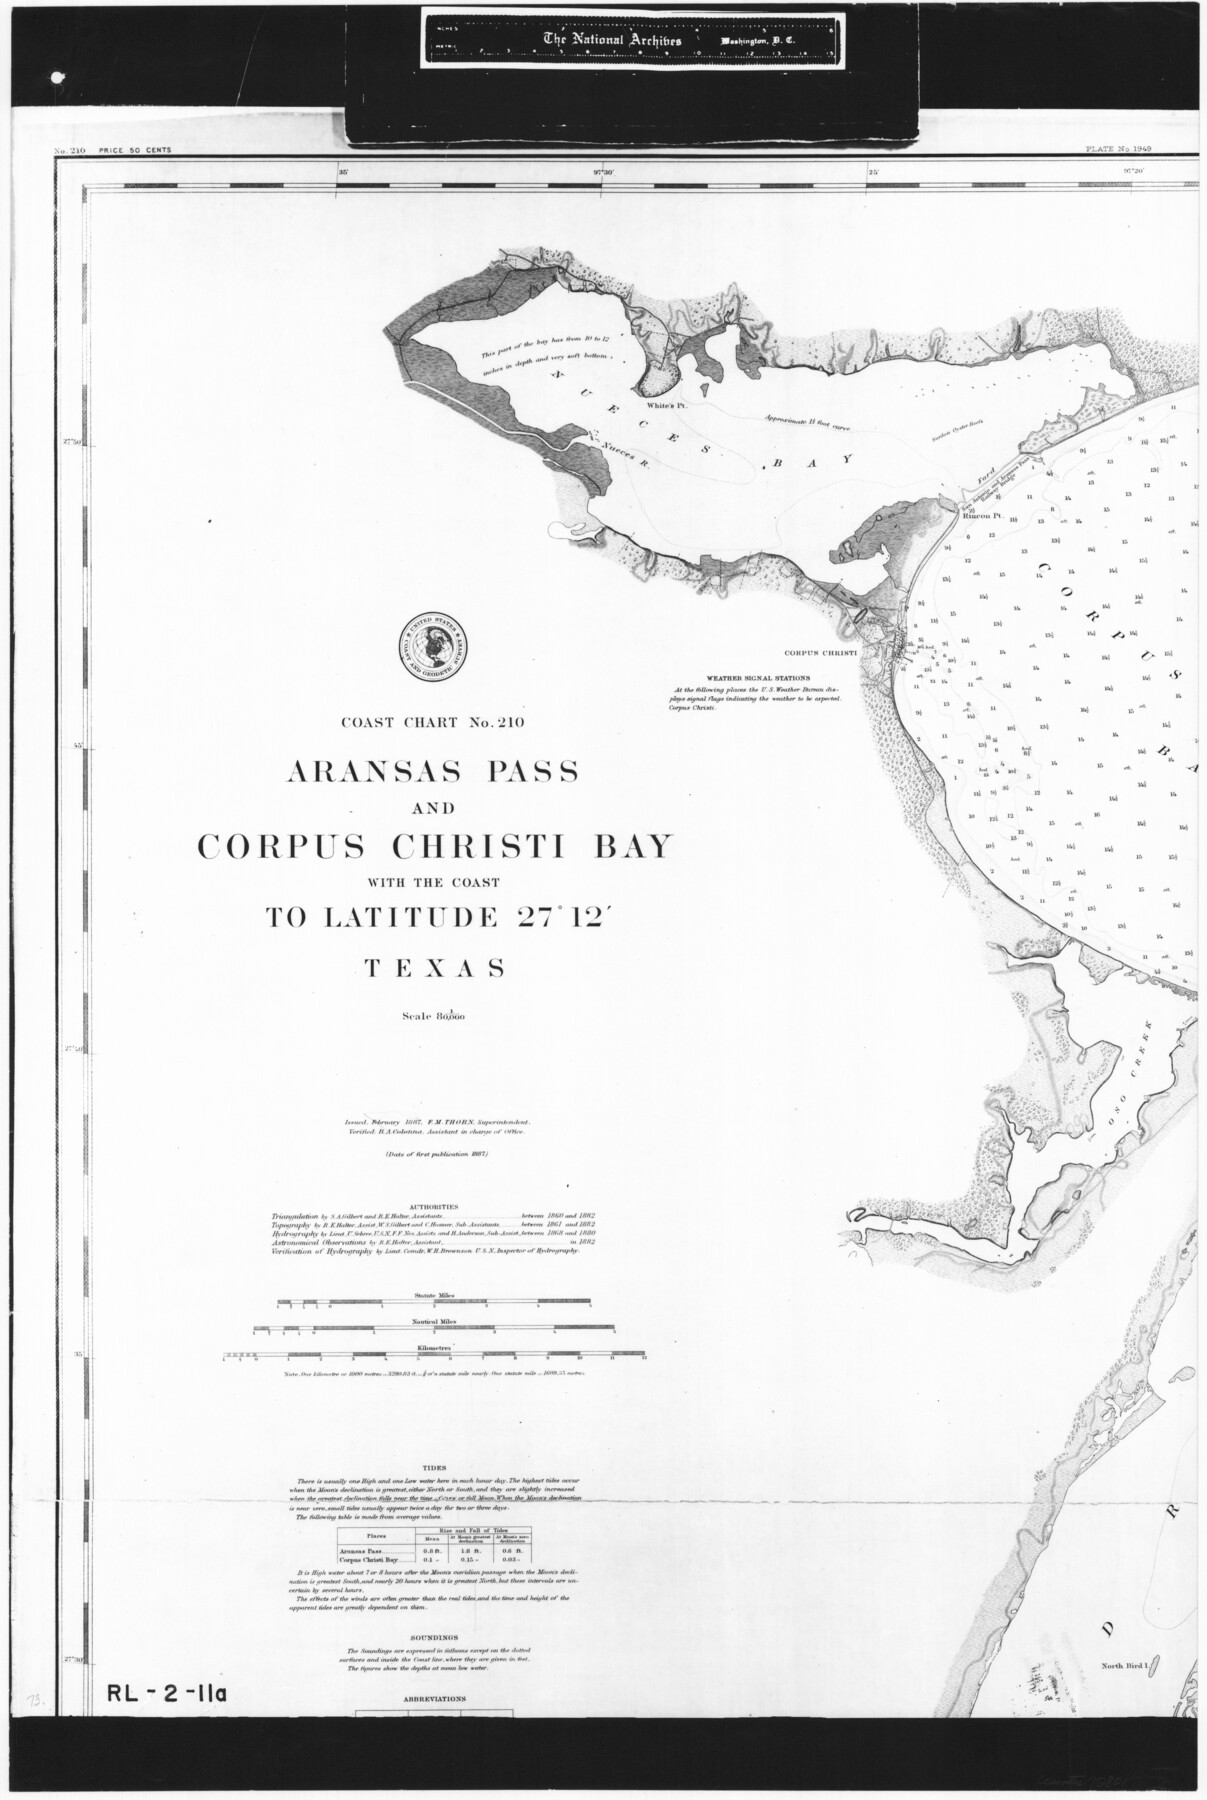 72801, Coast Chart No. 210 Aransas Pass and Corpus Christi Bay with the coast to latitude 27° 12' Texas, General Map Collection